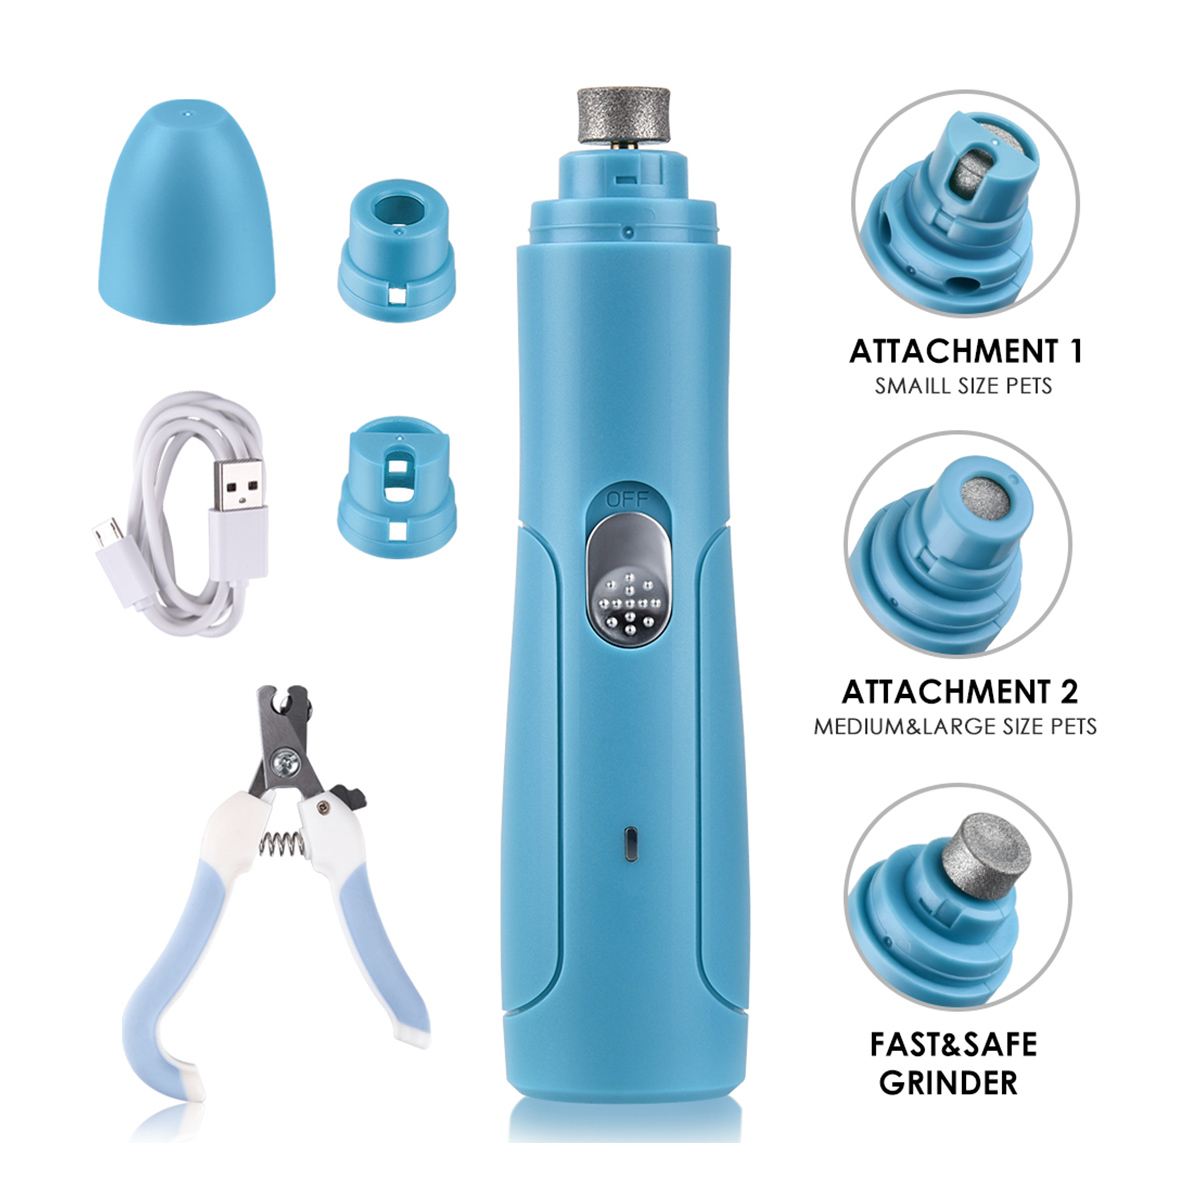 Dog-Nail-Grinder-3-Ports-Rechargeable-Low-Vibrations-Pet-Nail-Trimmer-1937723-11